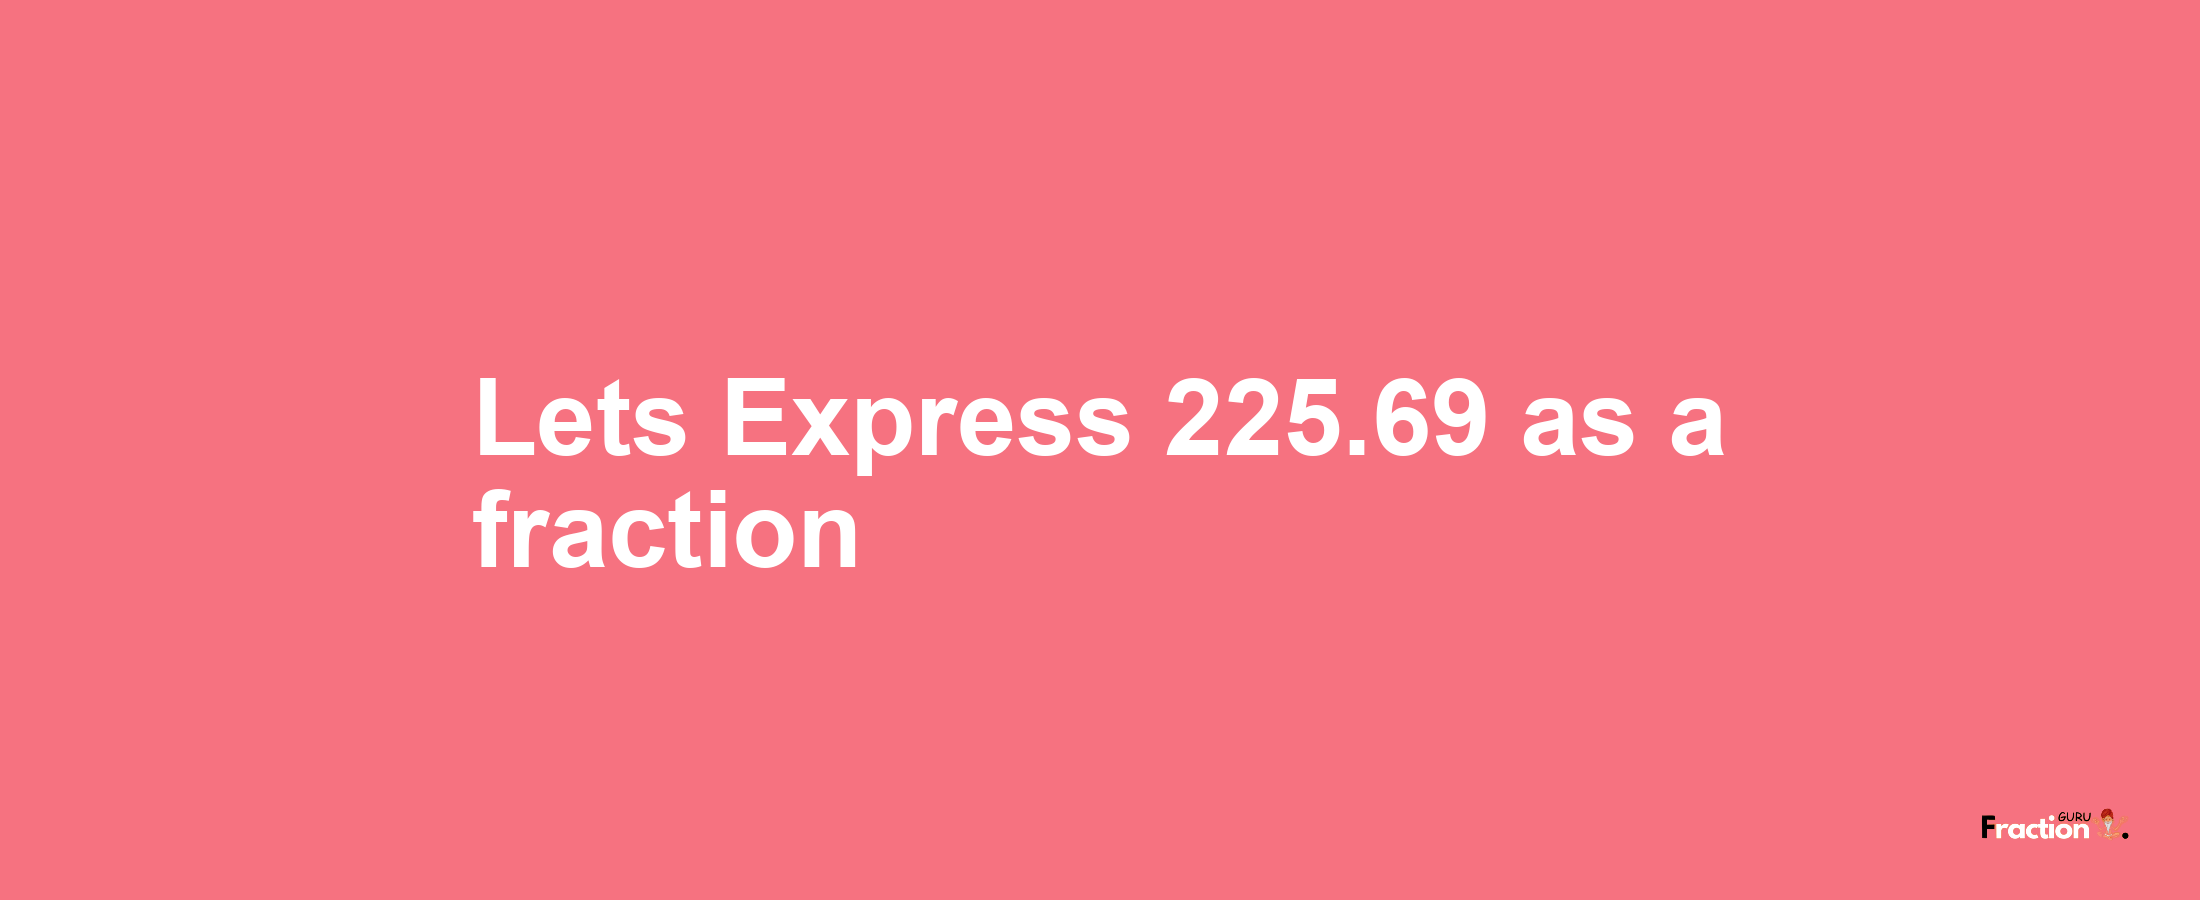 Lets Express 225.69 as afraction